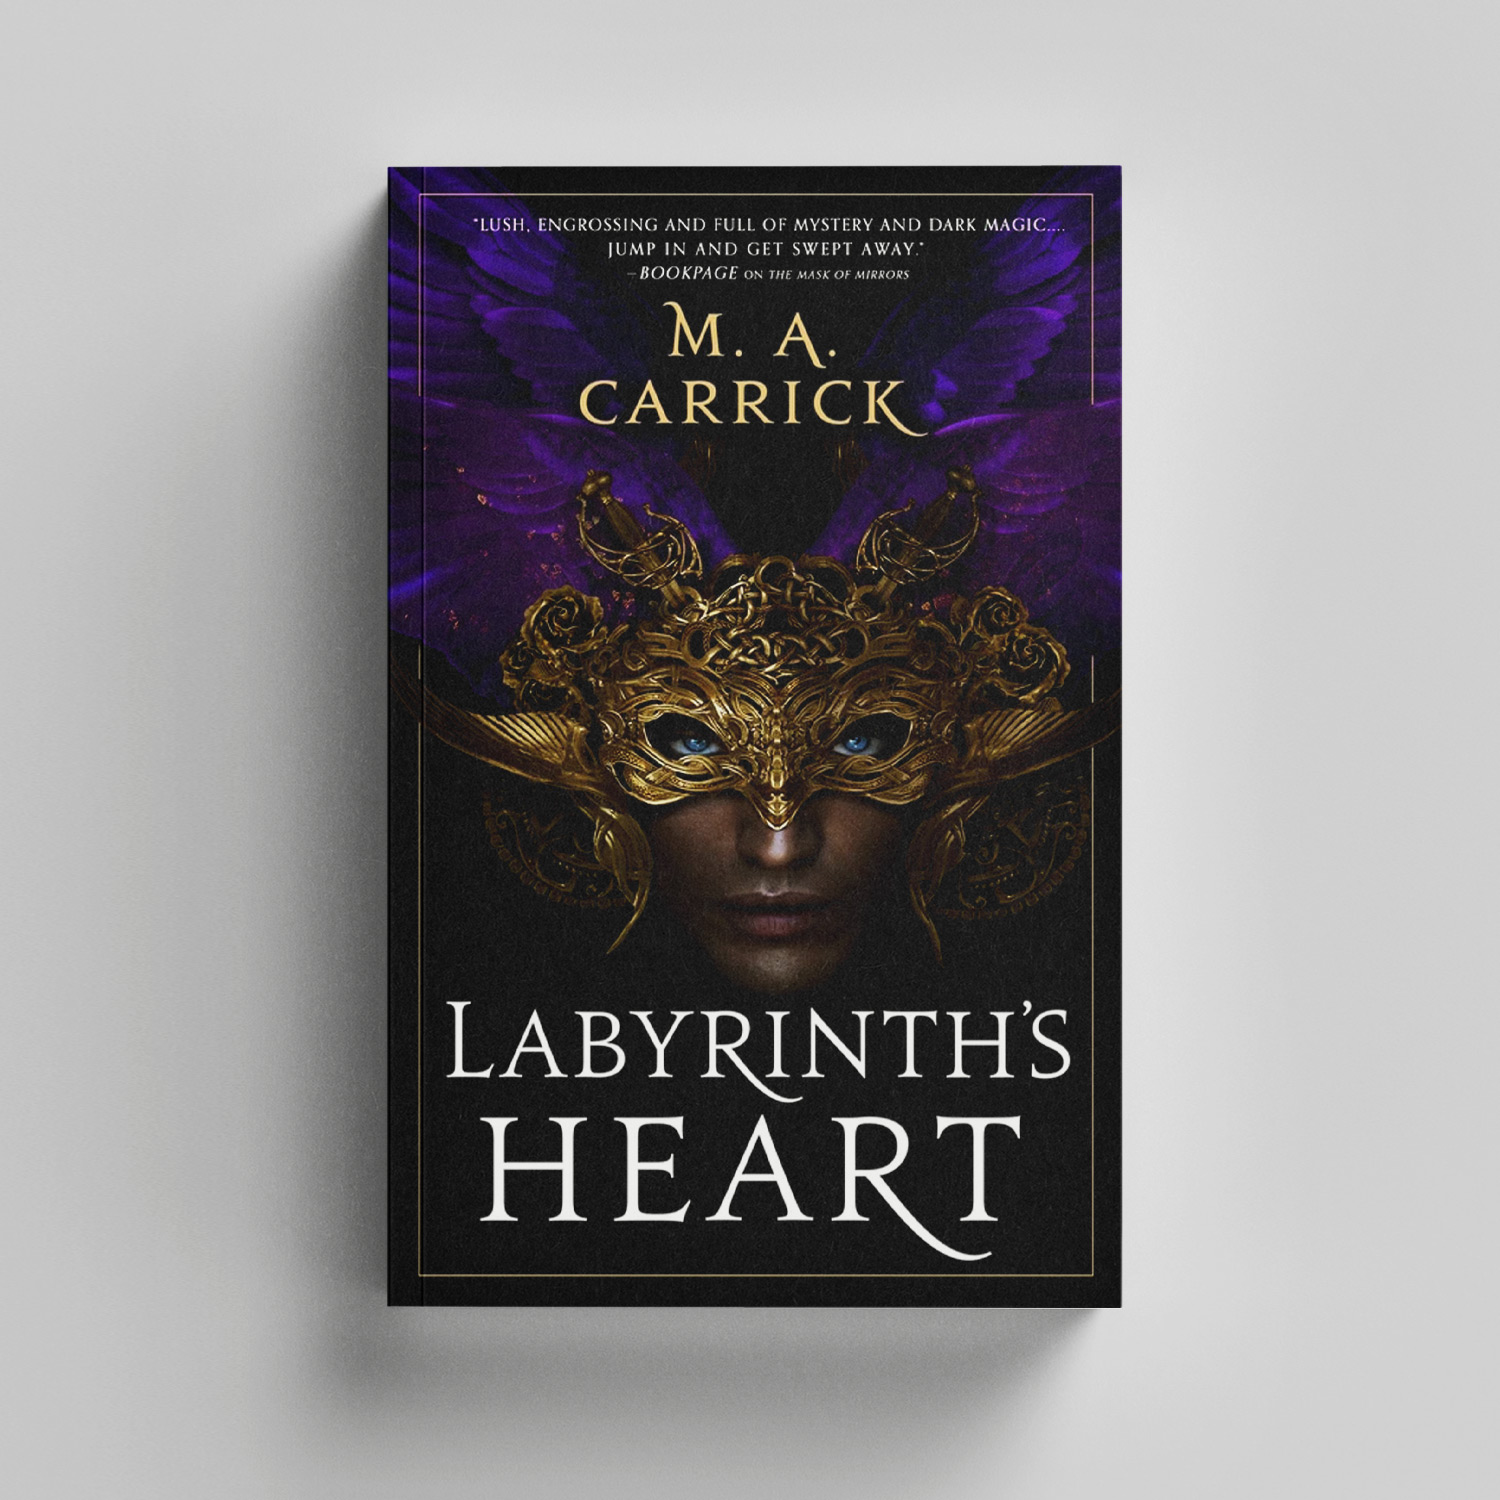 Labyrinth's Heart by M. A. Carrick